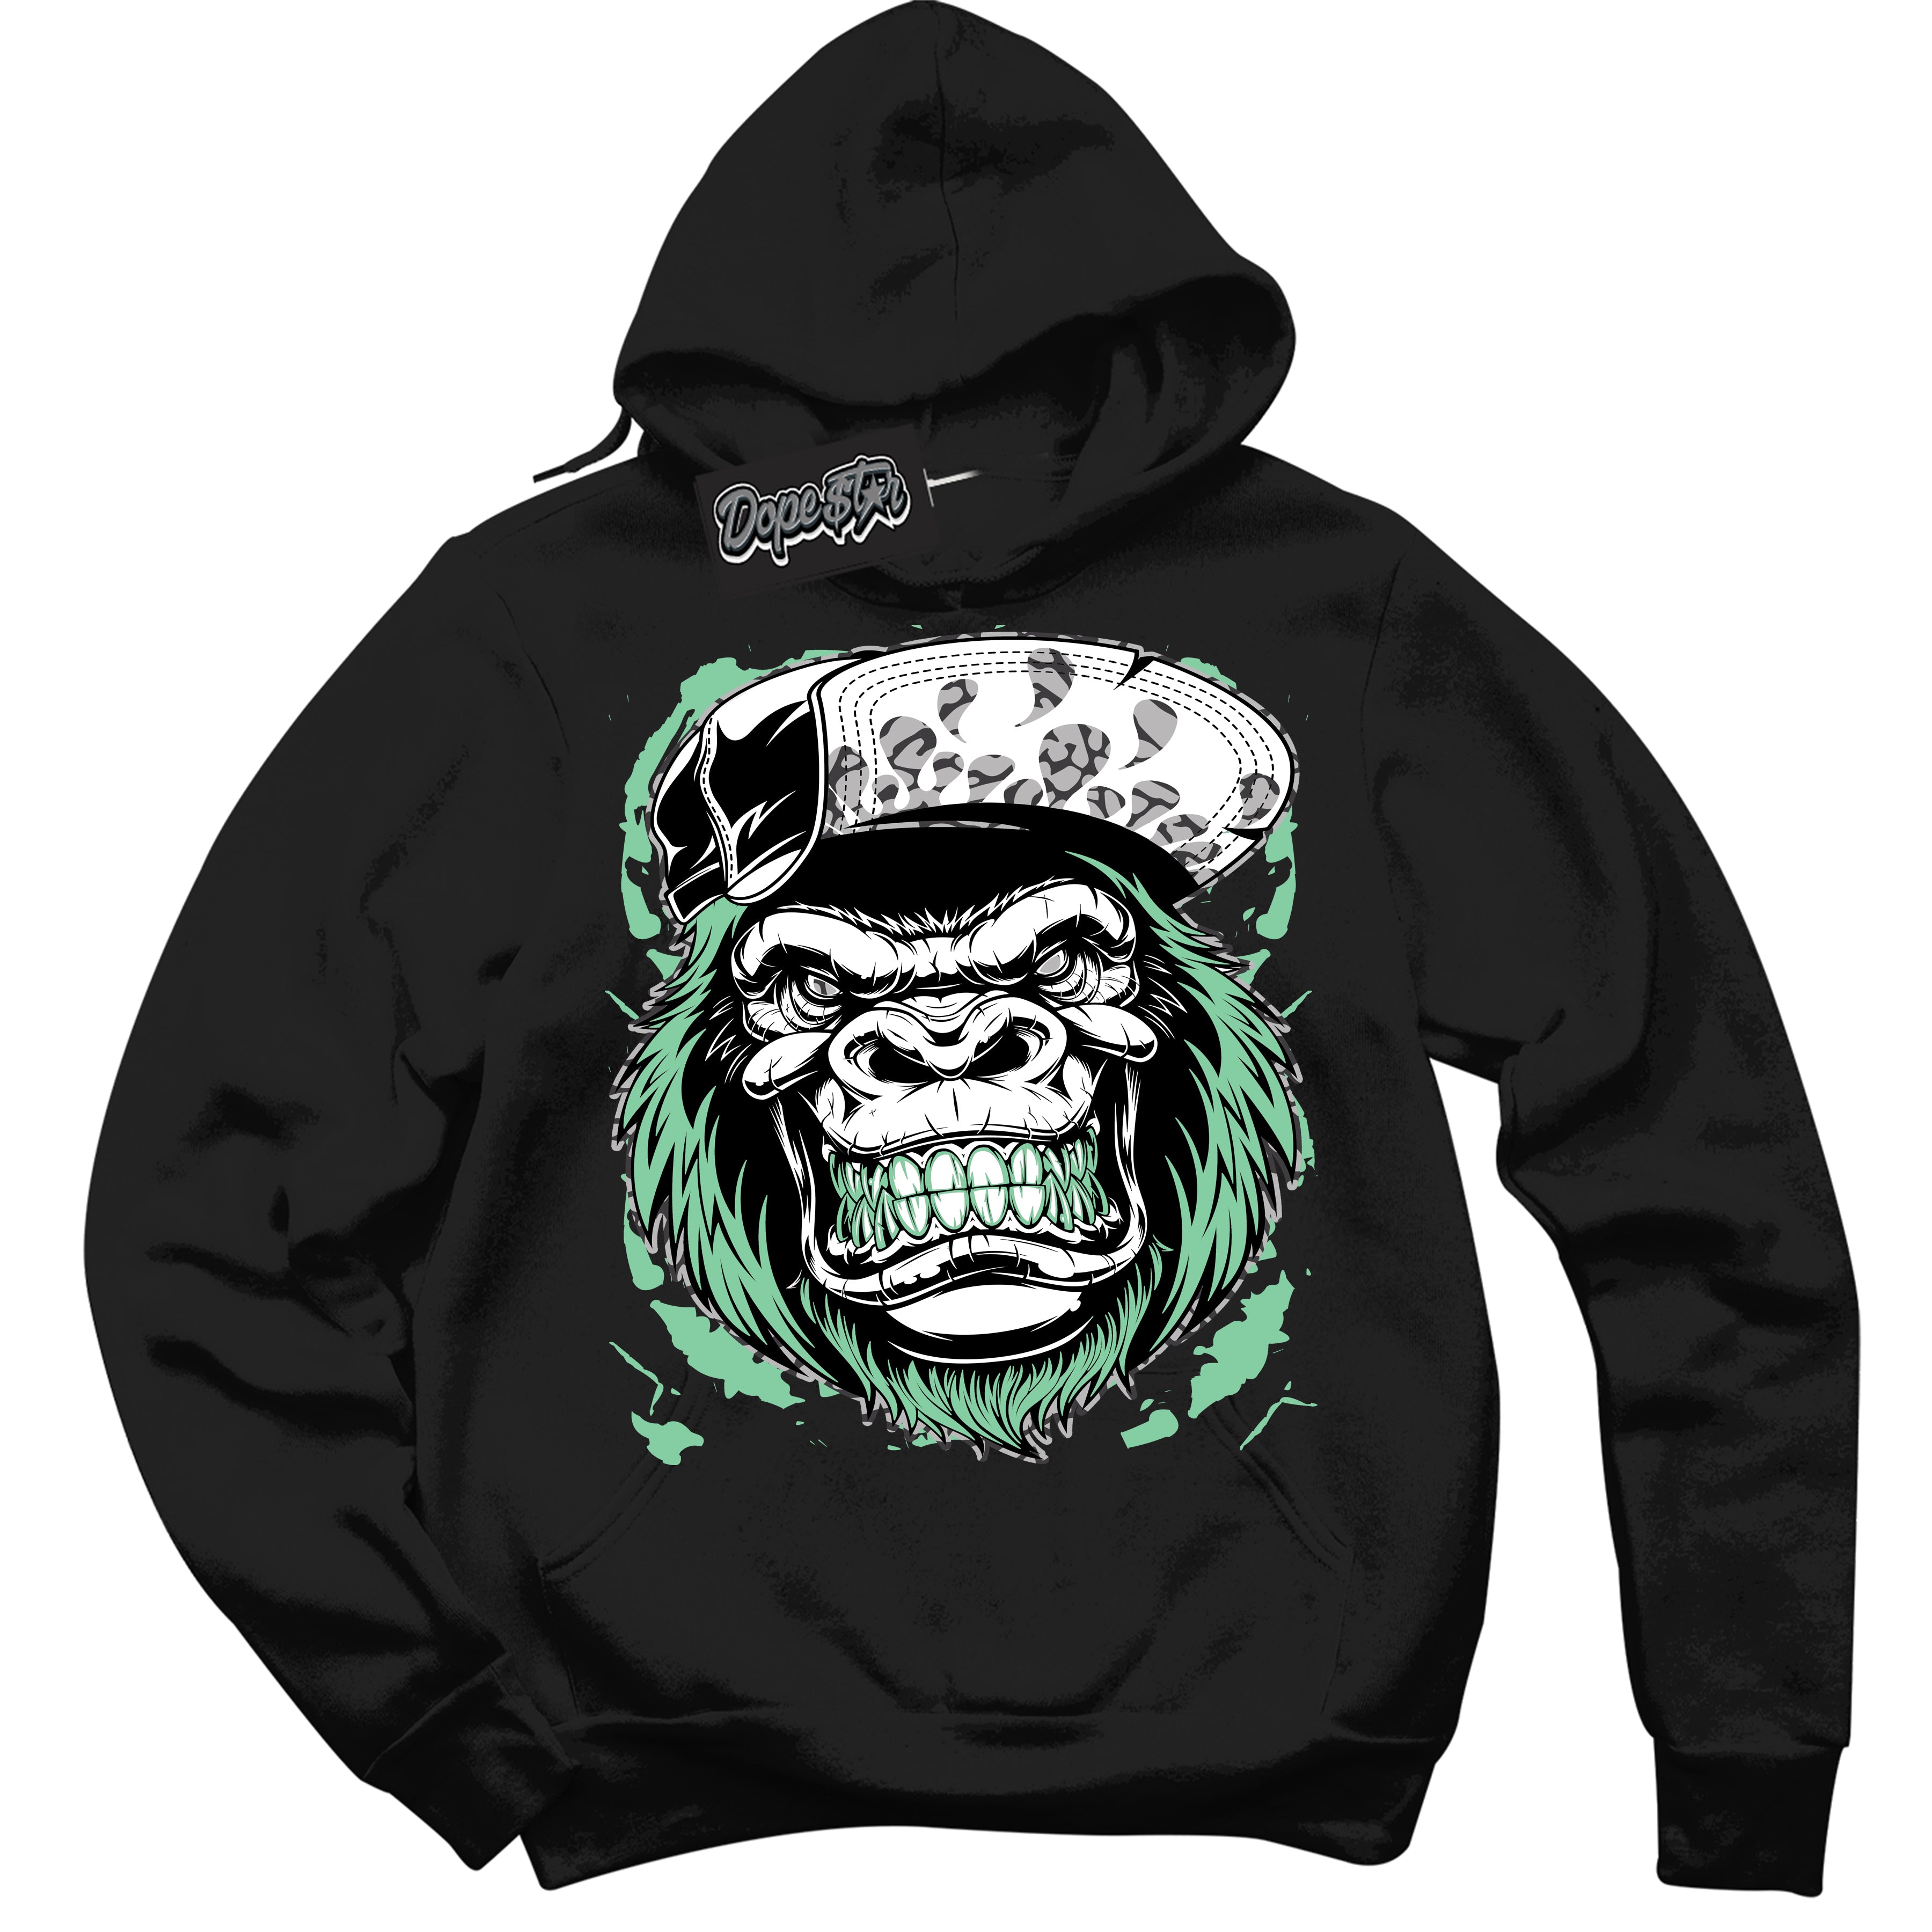 Cool Black Graphic DopeStar Hoodie with “ Gorilla Beast “ print, that perfectly matches Green Glow 3S sneakers